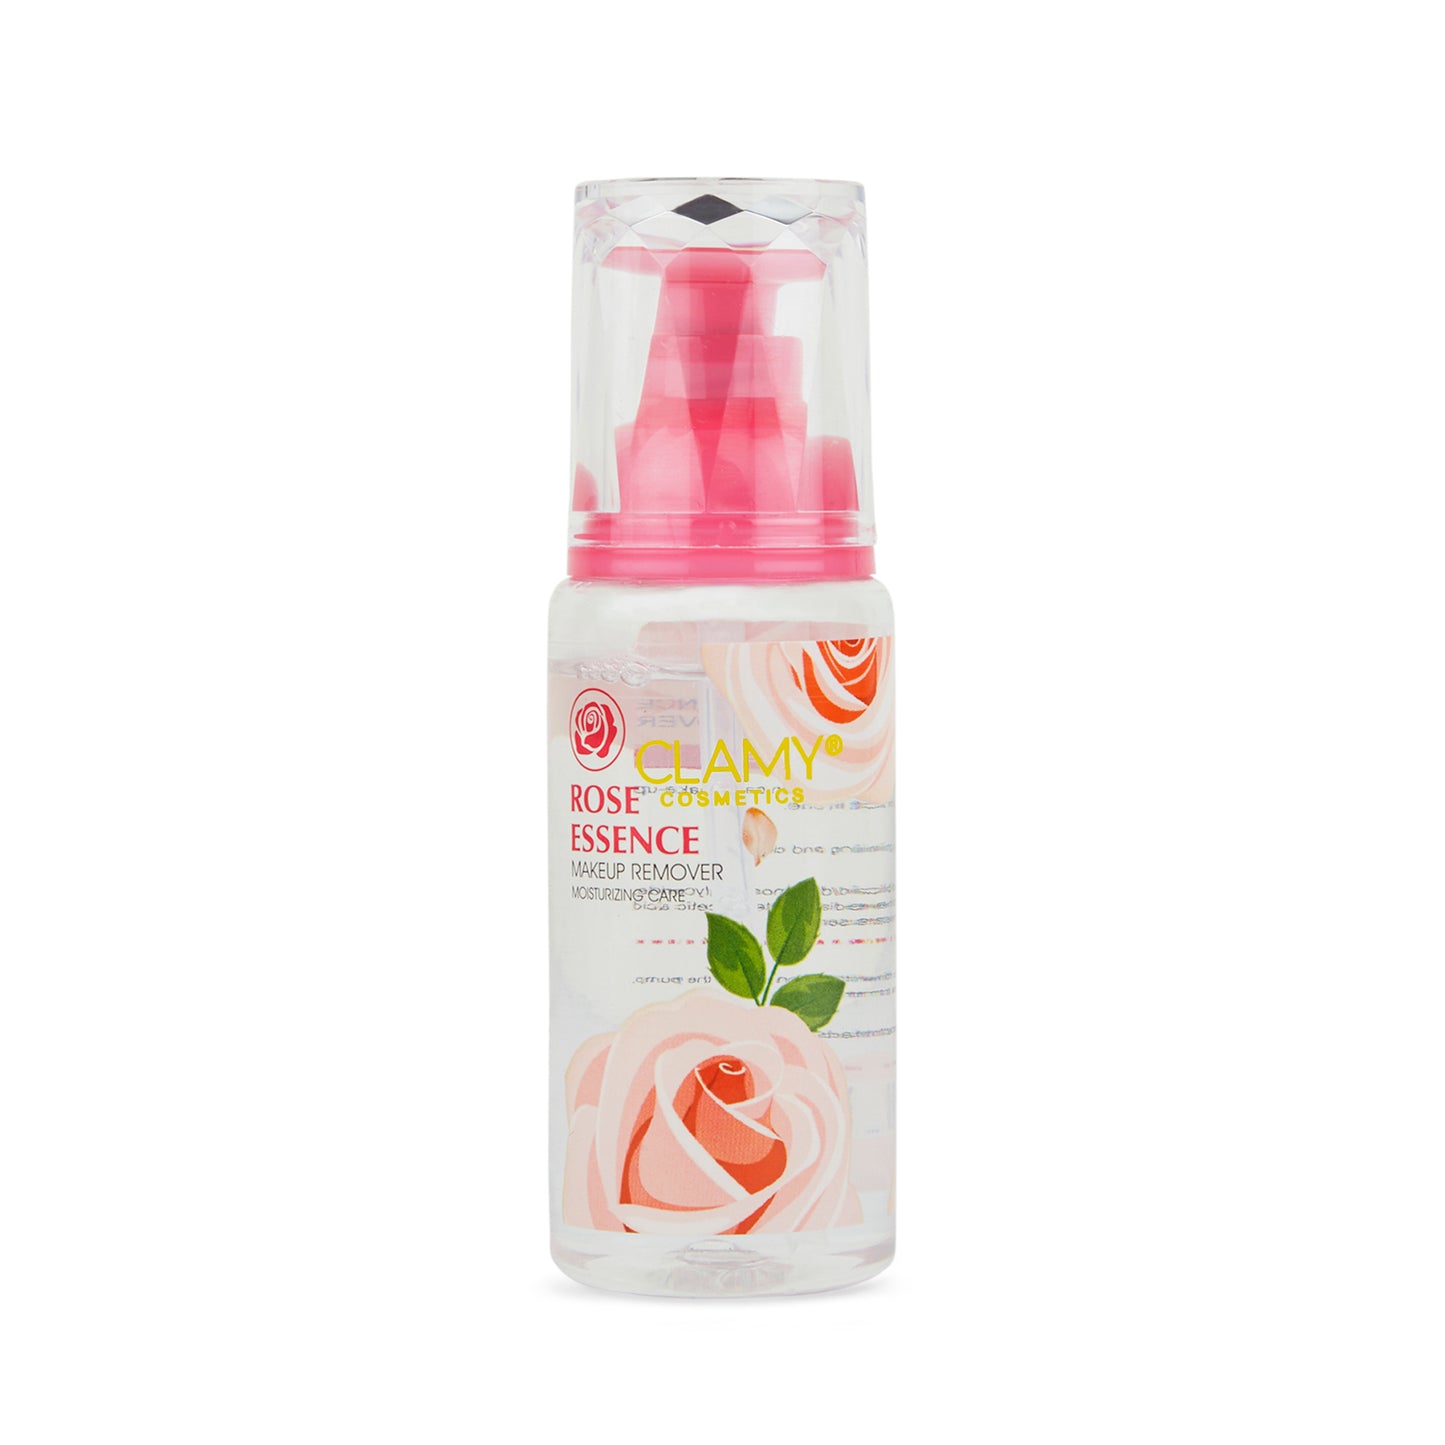 Clamy Gentle Cleansing Makeup Remover Easy Pump Dispensing, Essence, Moisturizing, Refreshing 100ml